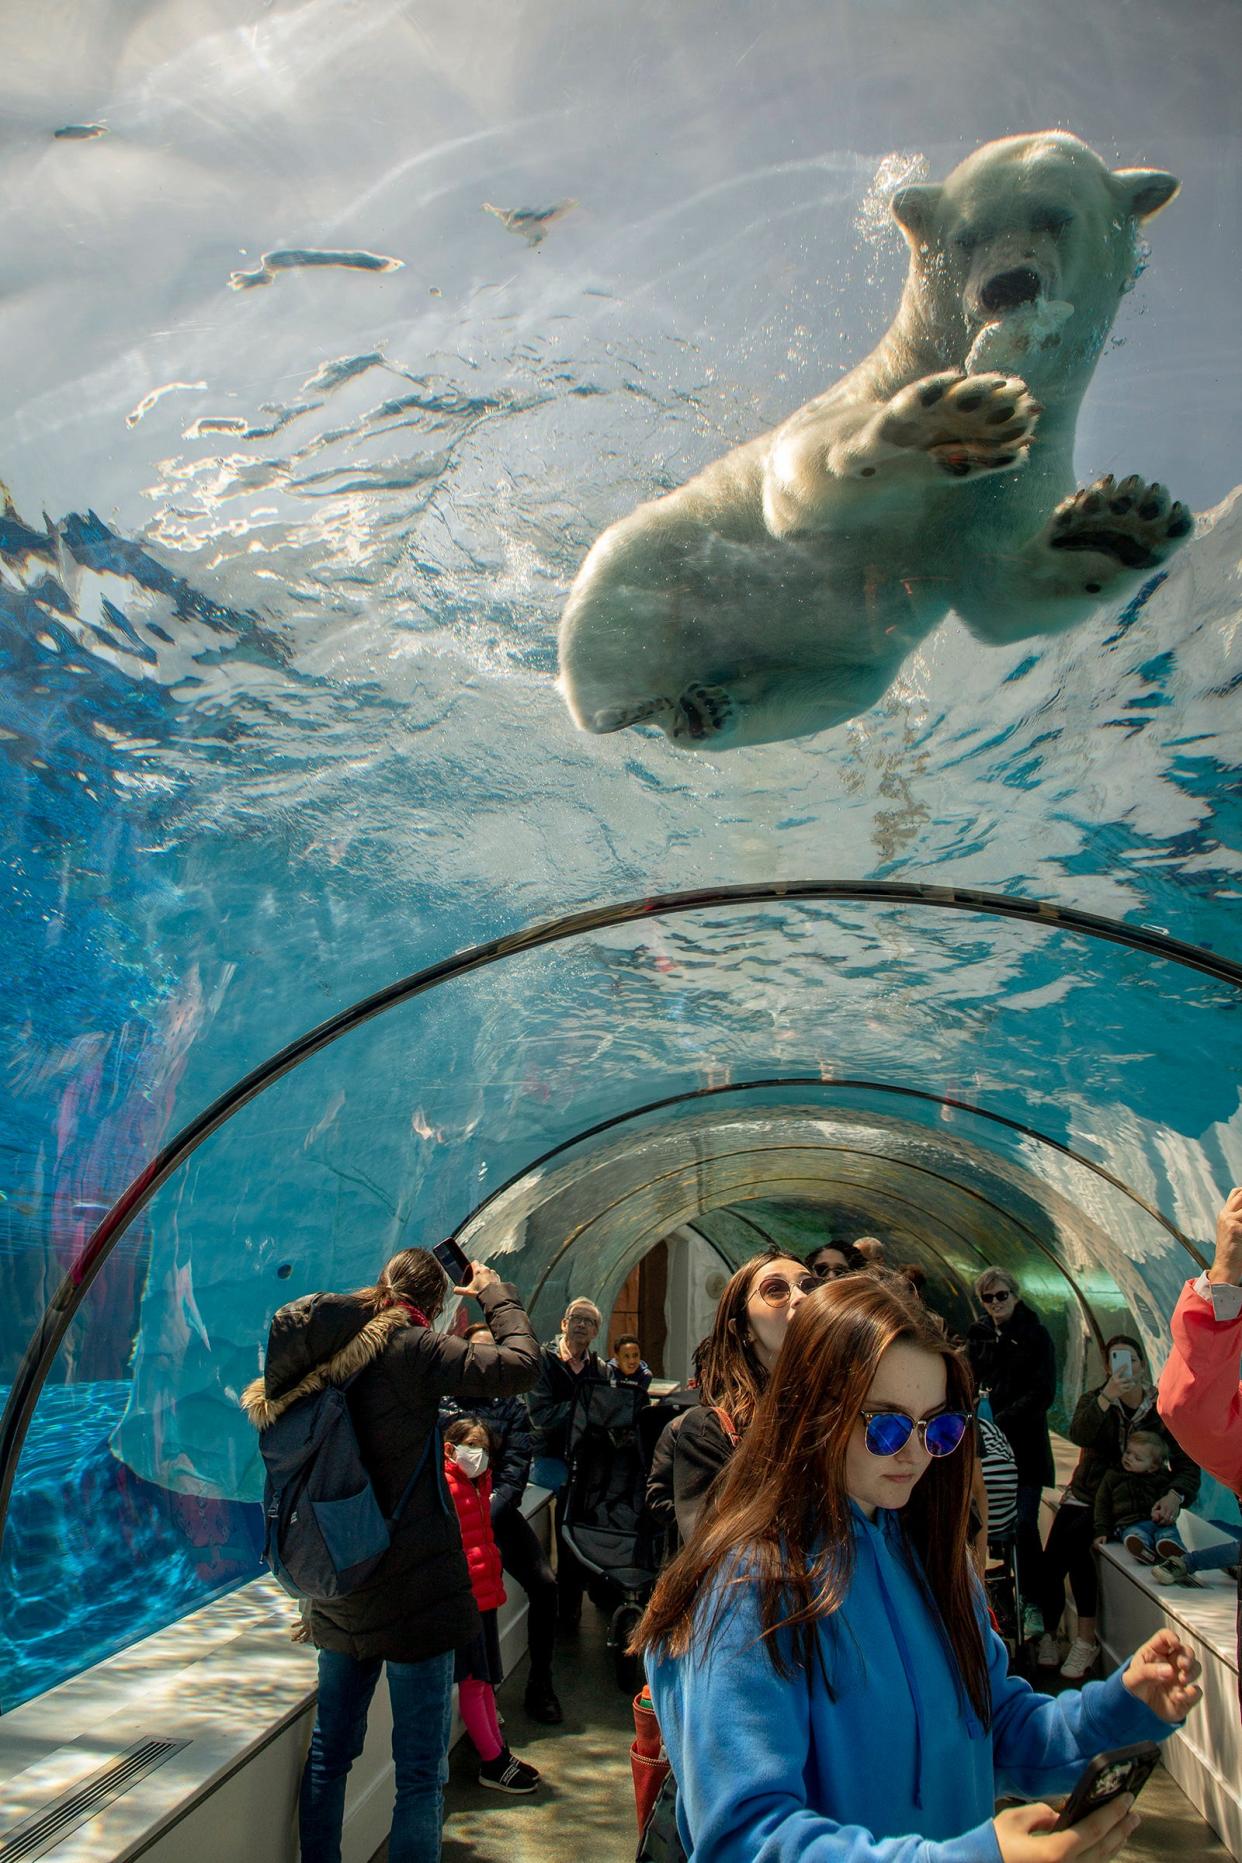 Guests watch as a polar bear eats food that has been fed to it by polar bear keeper Thomas Brown at the Detroit Zoo on April 29, 2022. Brown explains that he varies their feeding times and style to mimic as much of their natural feeding behaviors in the wild.